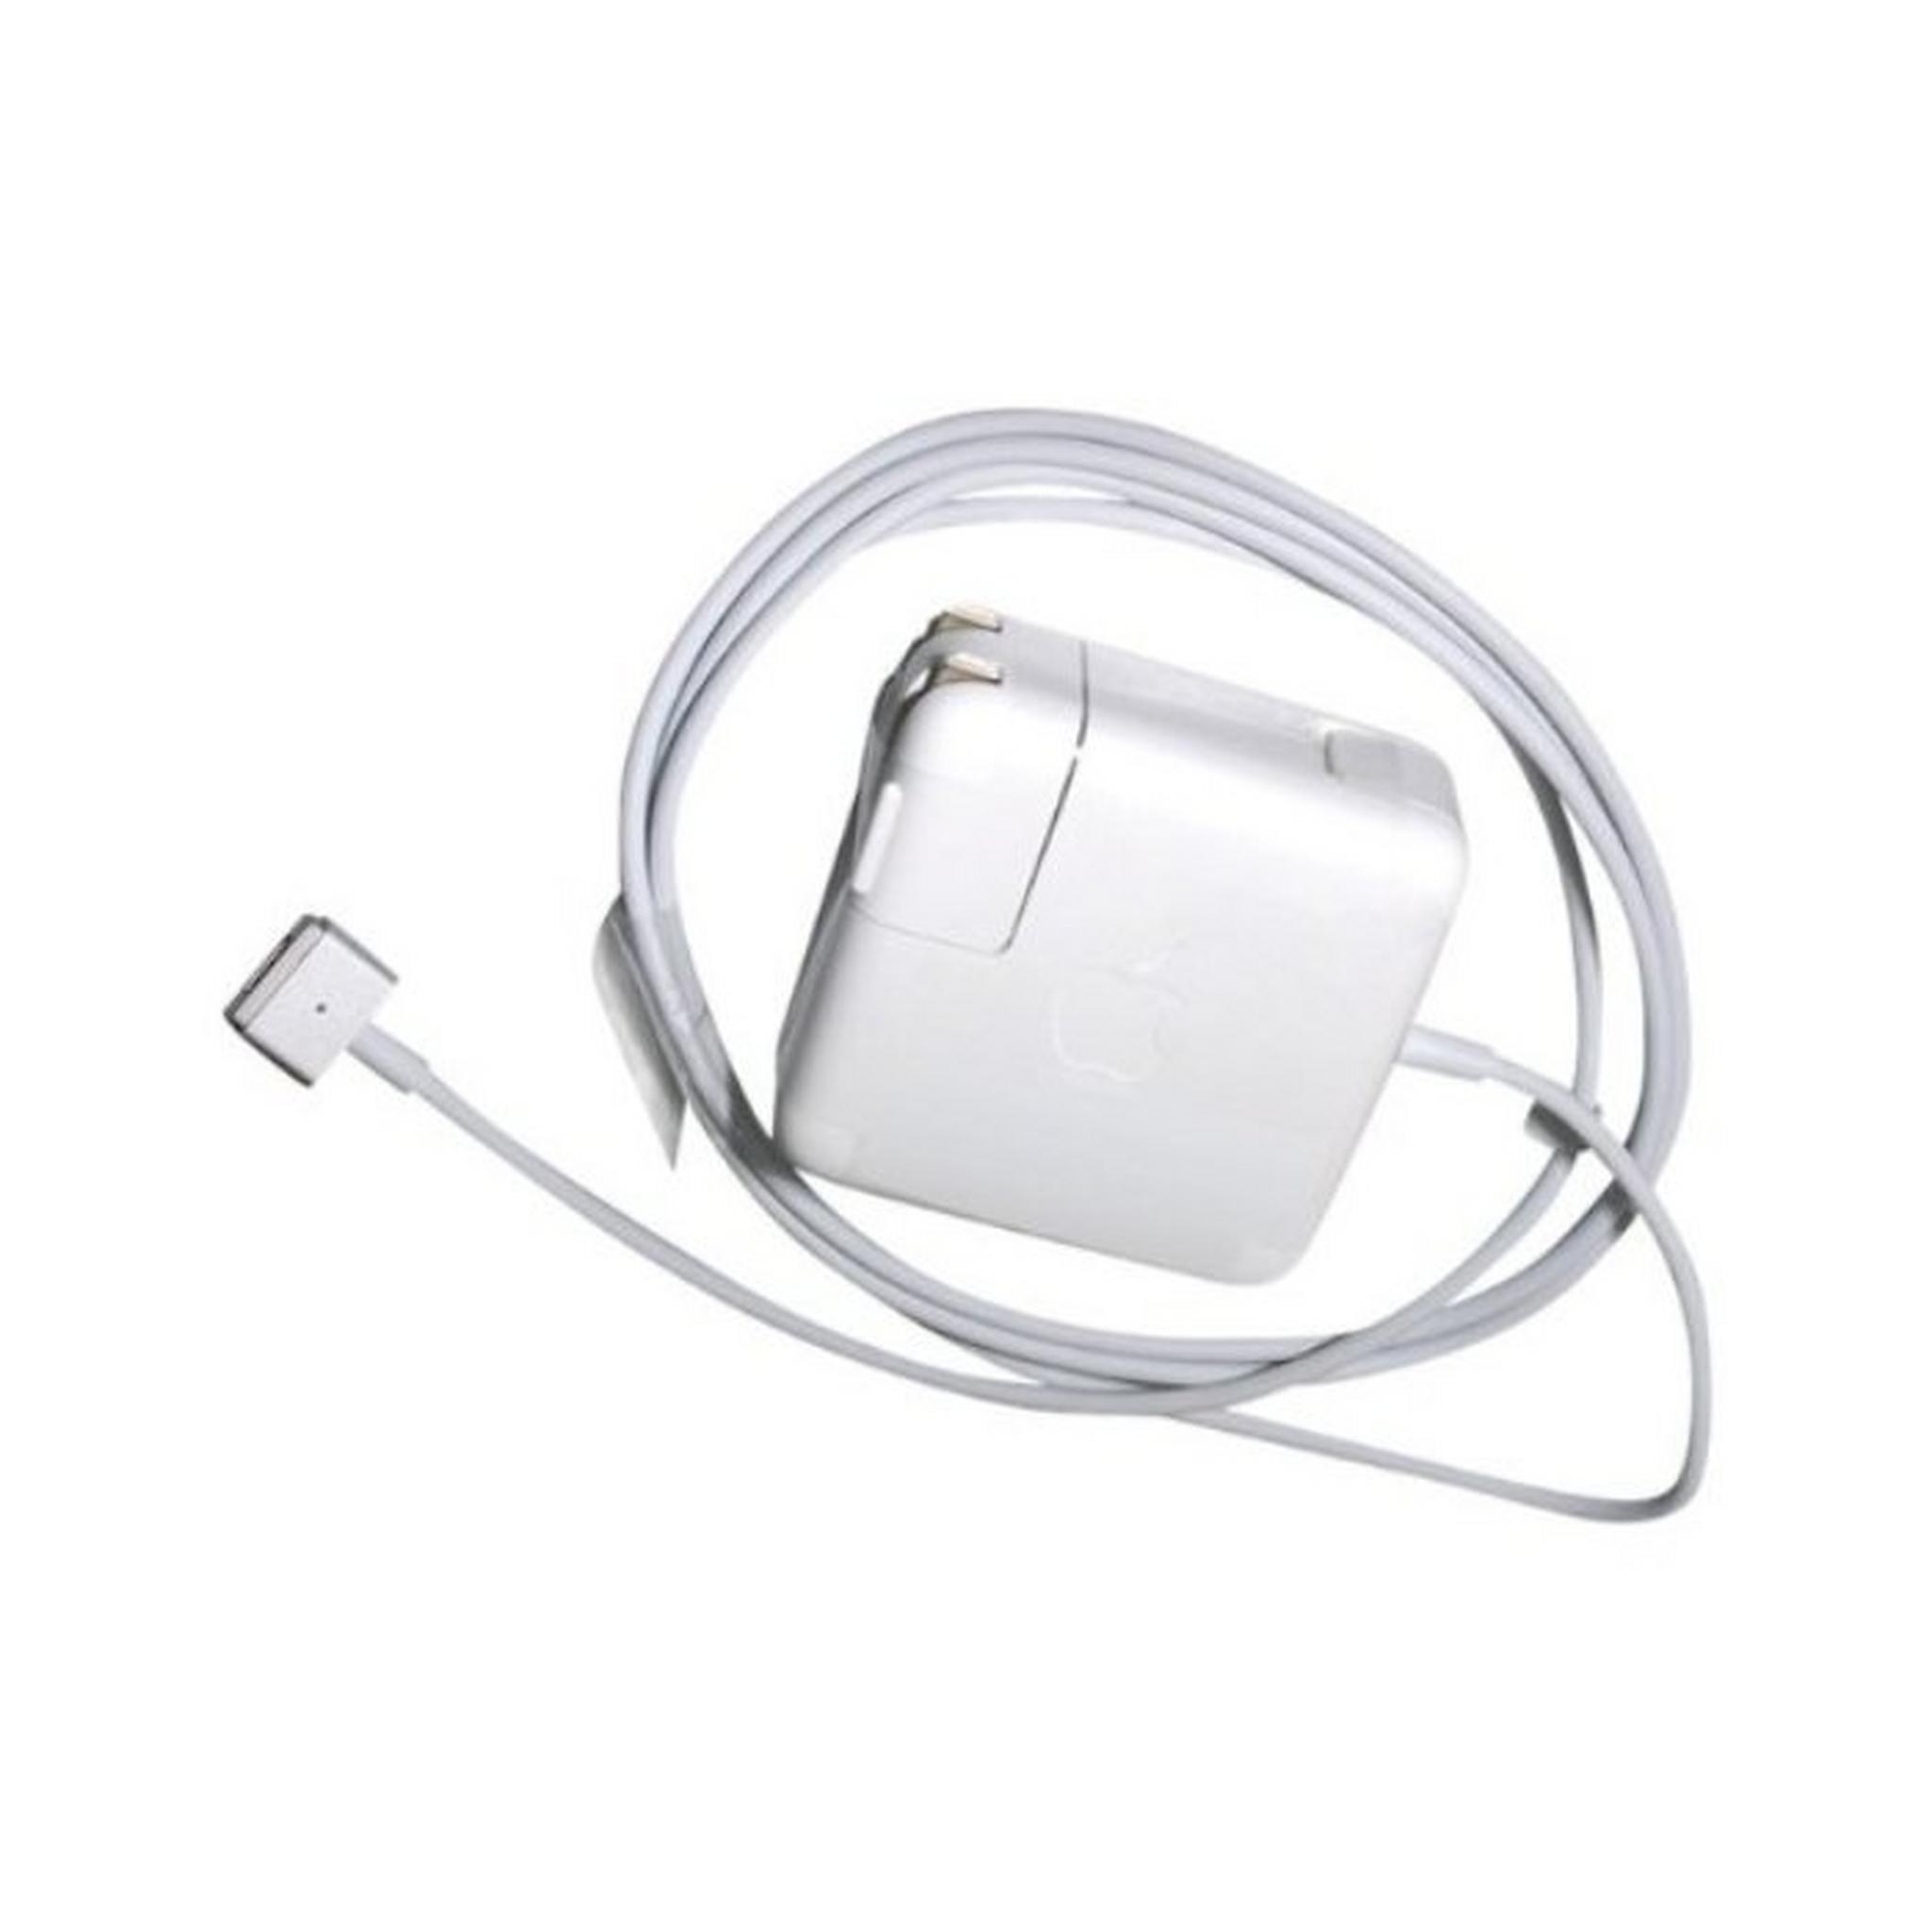 Apple MagSafe 2 60W Power Adapter For 13-Inch MacBook Pro (MD565LL/A) – White